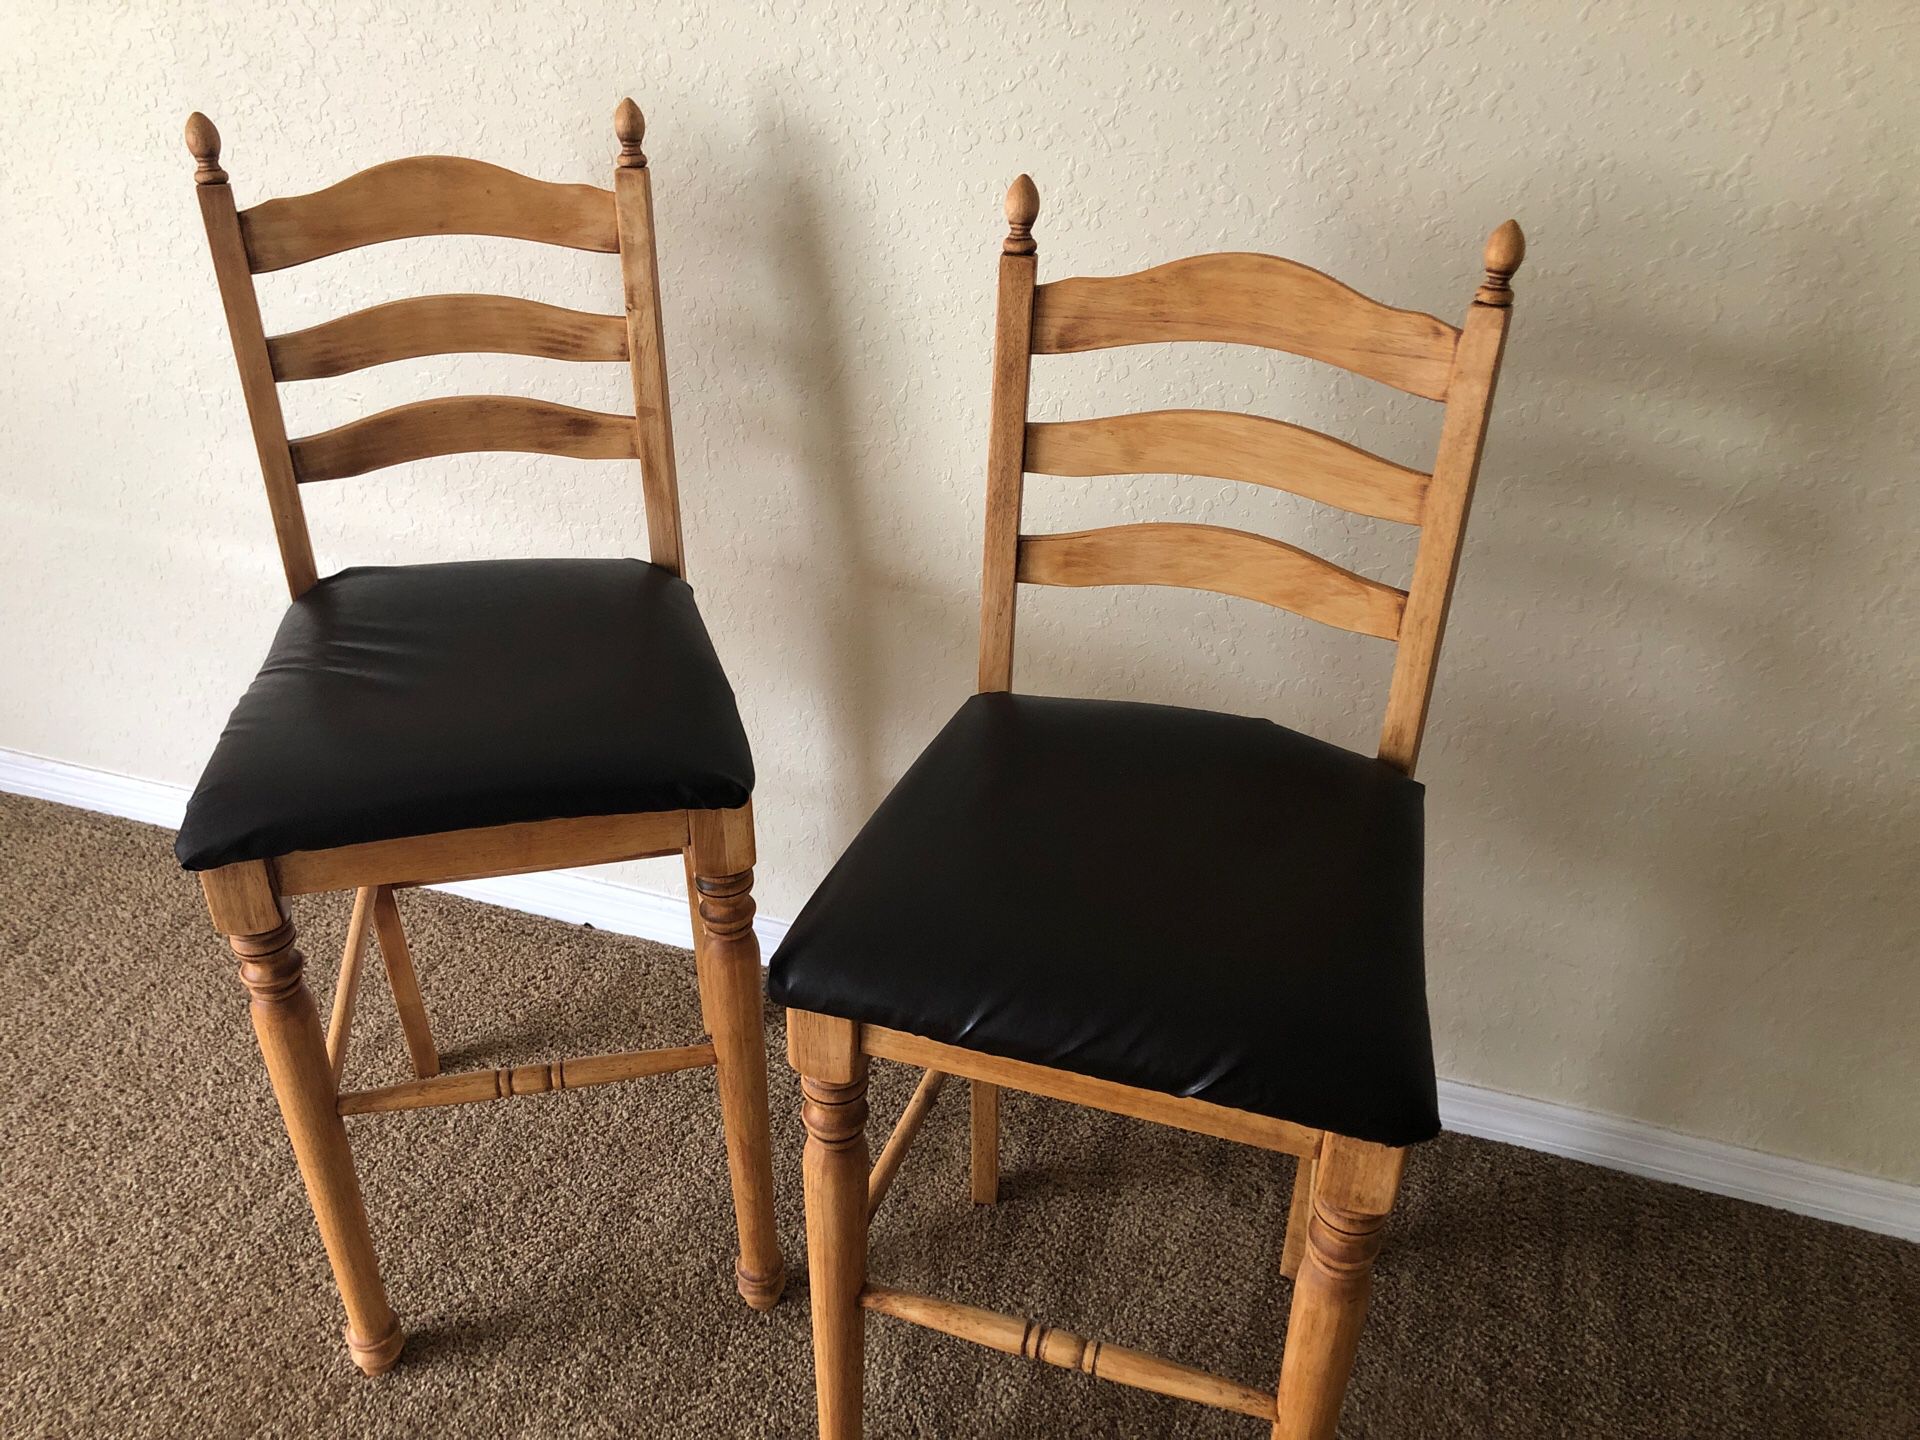 Two beautiful high chairs antiques